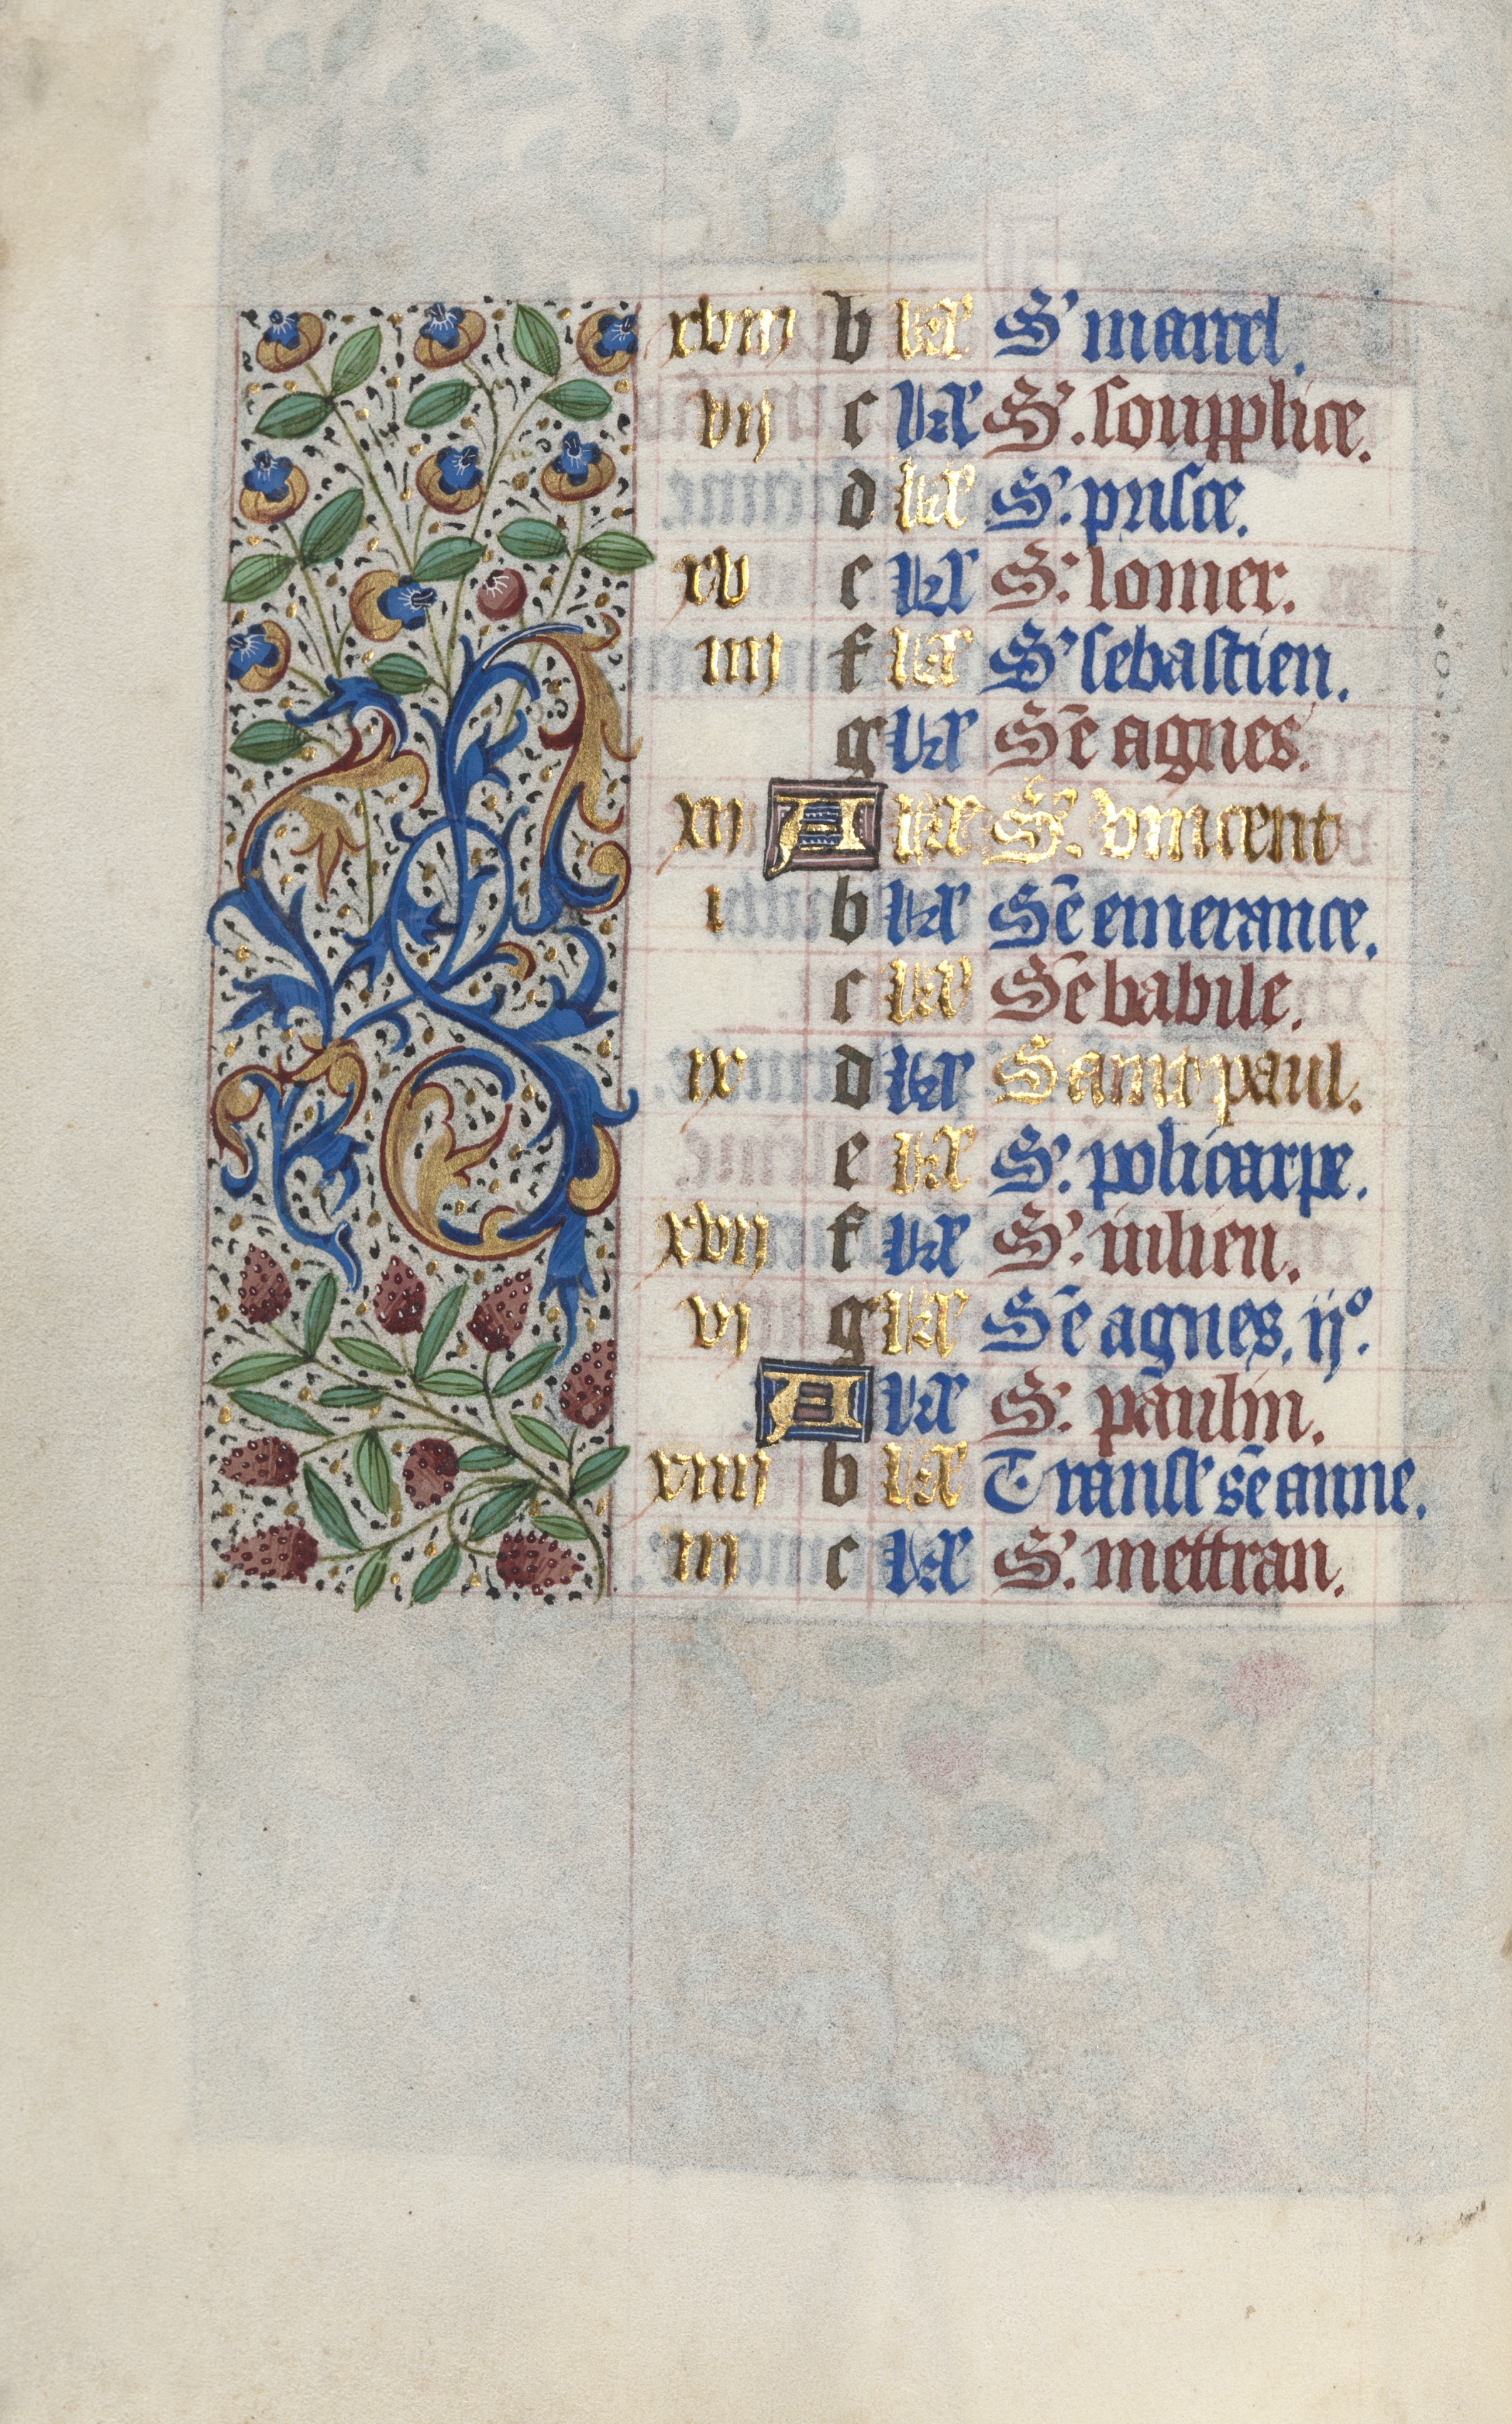 Book of Hours (Use of Rouen): fol. 1v